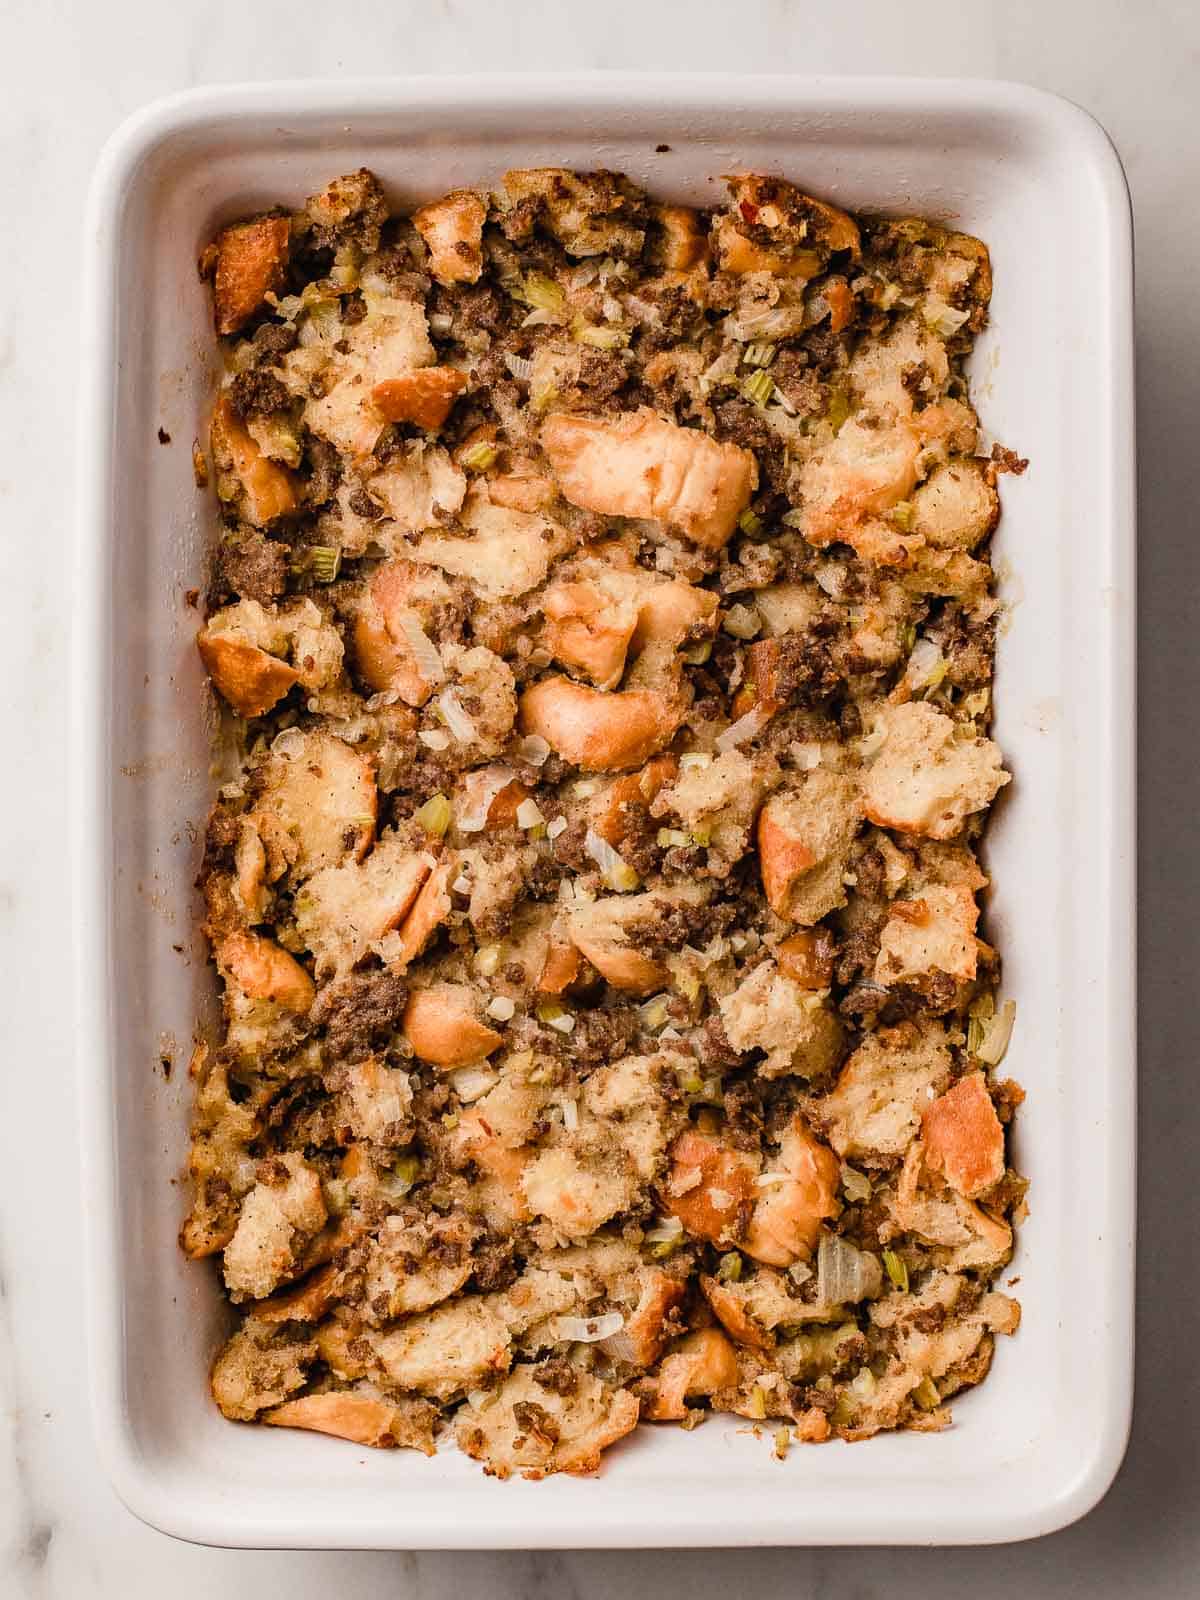 Sausage bread stuffing in a baking dish.